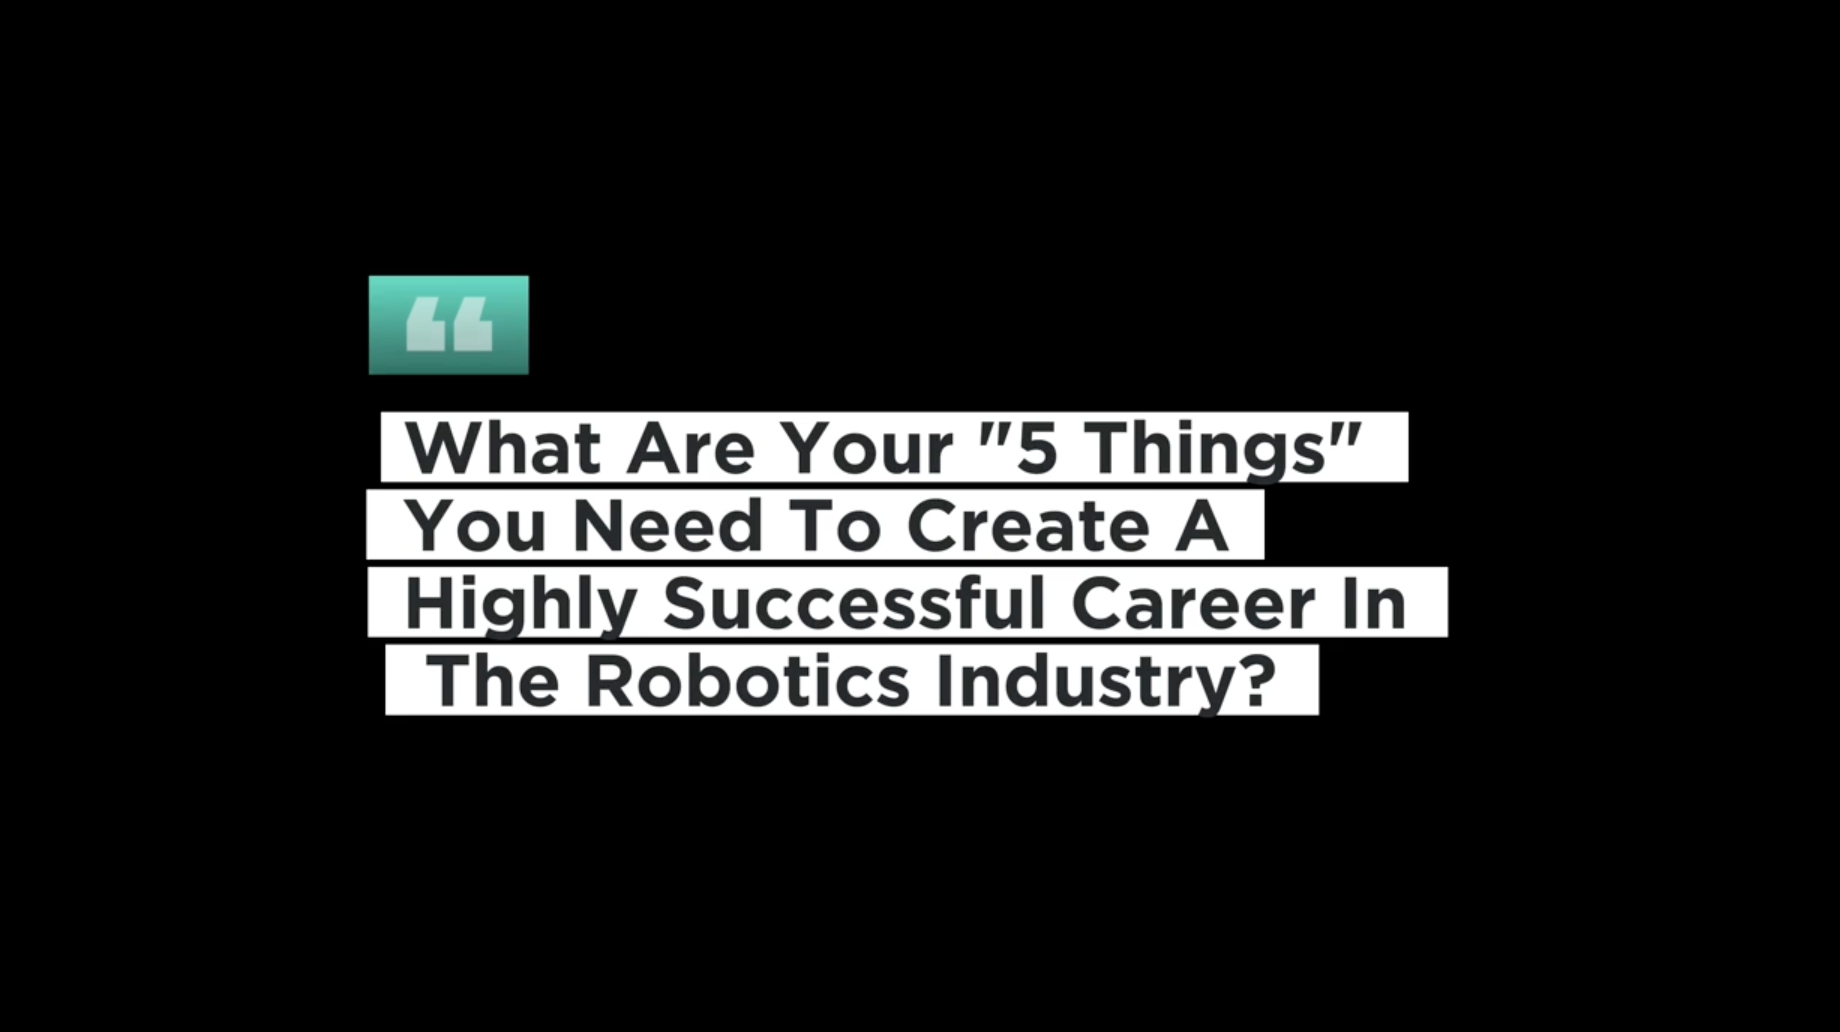 5 Things You Need to Succeed in the Surgical Robotics Industry